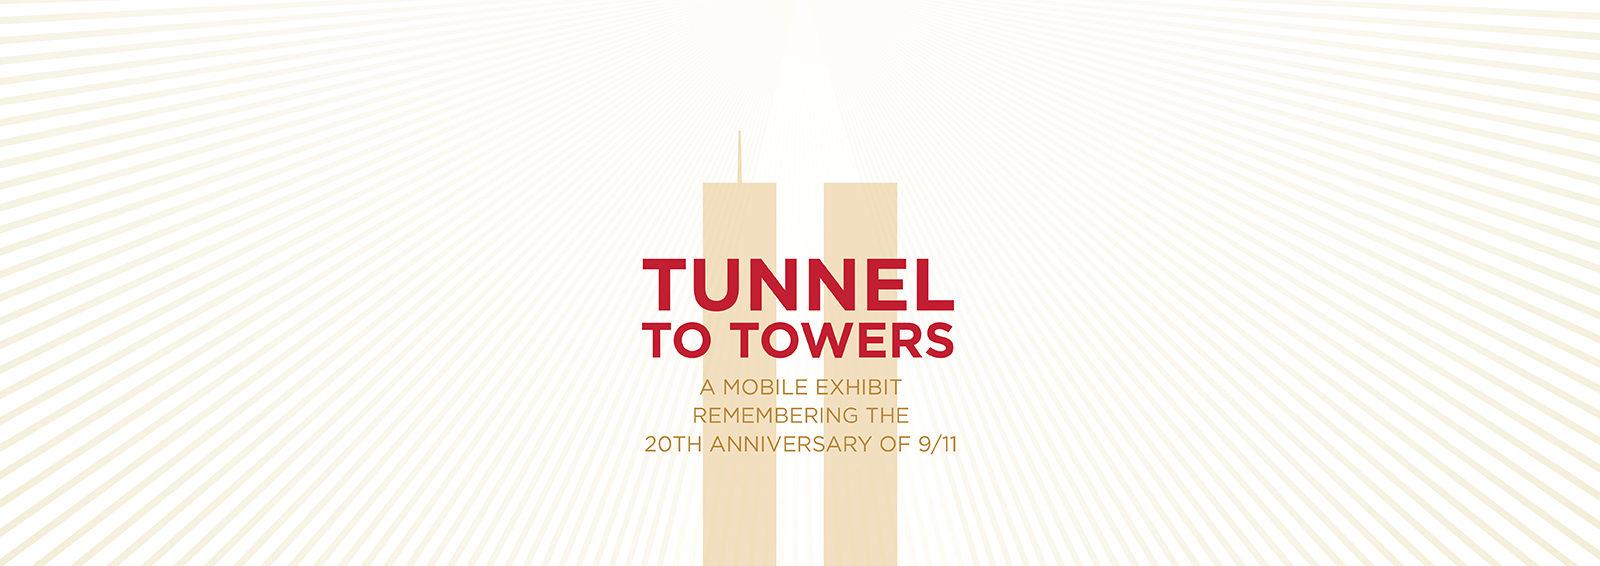 Tunnel To Towers A Mobile Exhibit Remembering The 20th Anniversary of 9/11